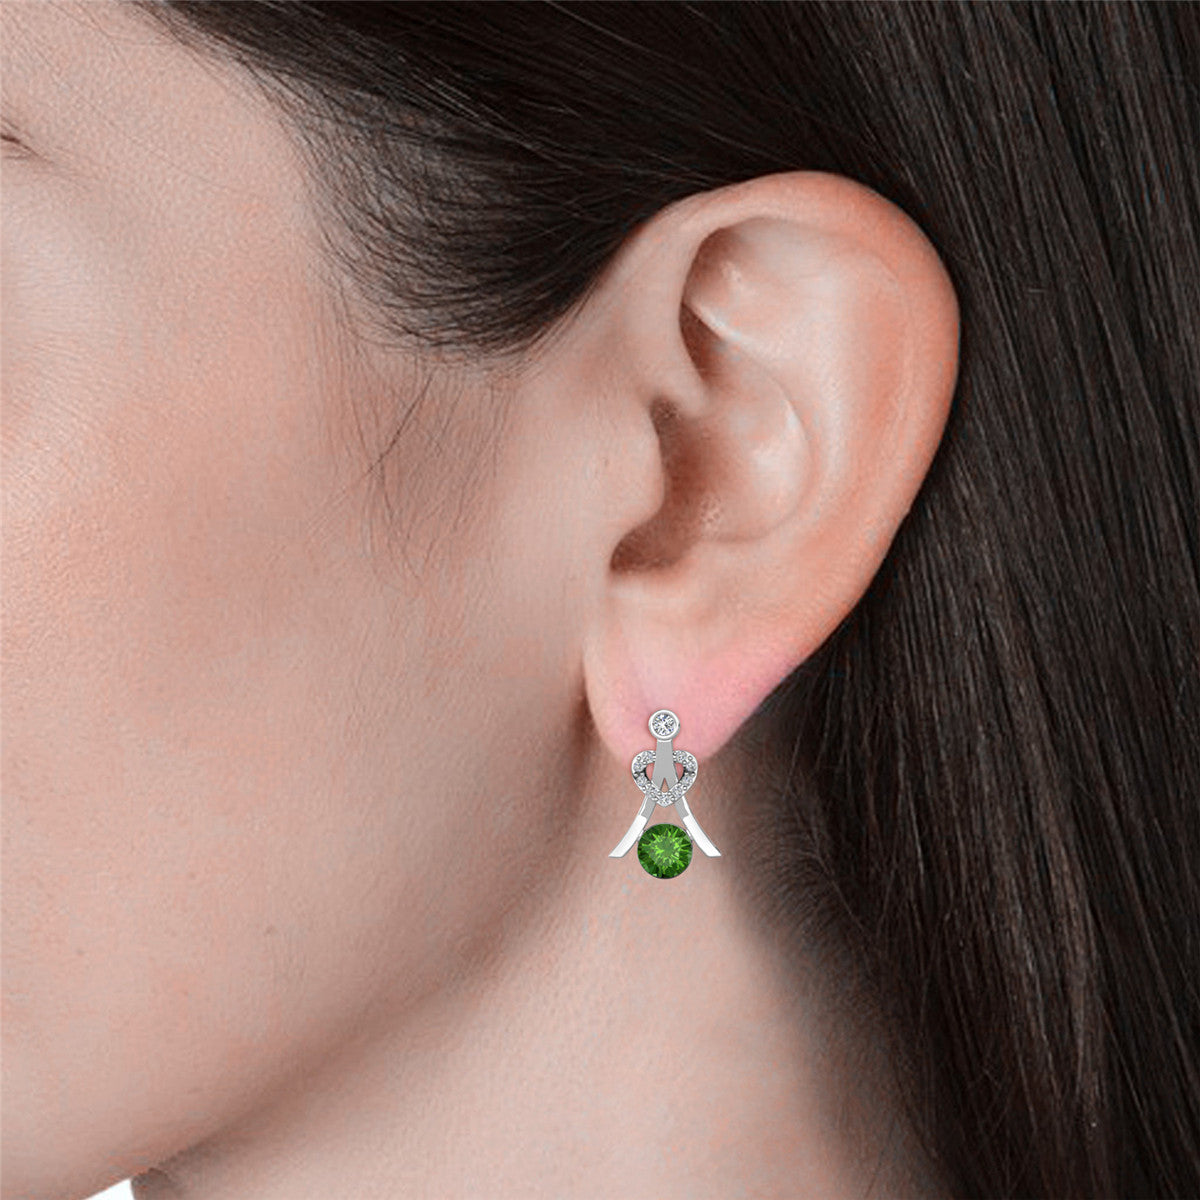 Serenity August Birthstone Peridot Earrings, 18k White Gold Plated Silver Earrings with Round Cut Crystals